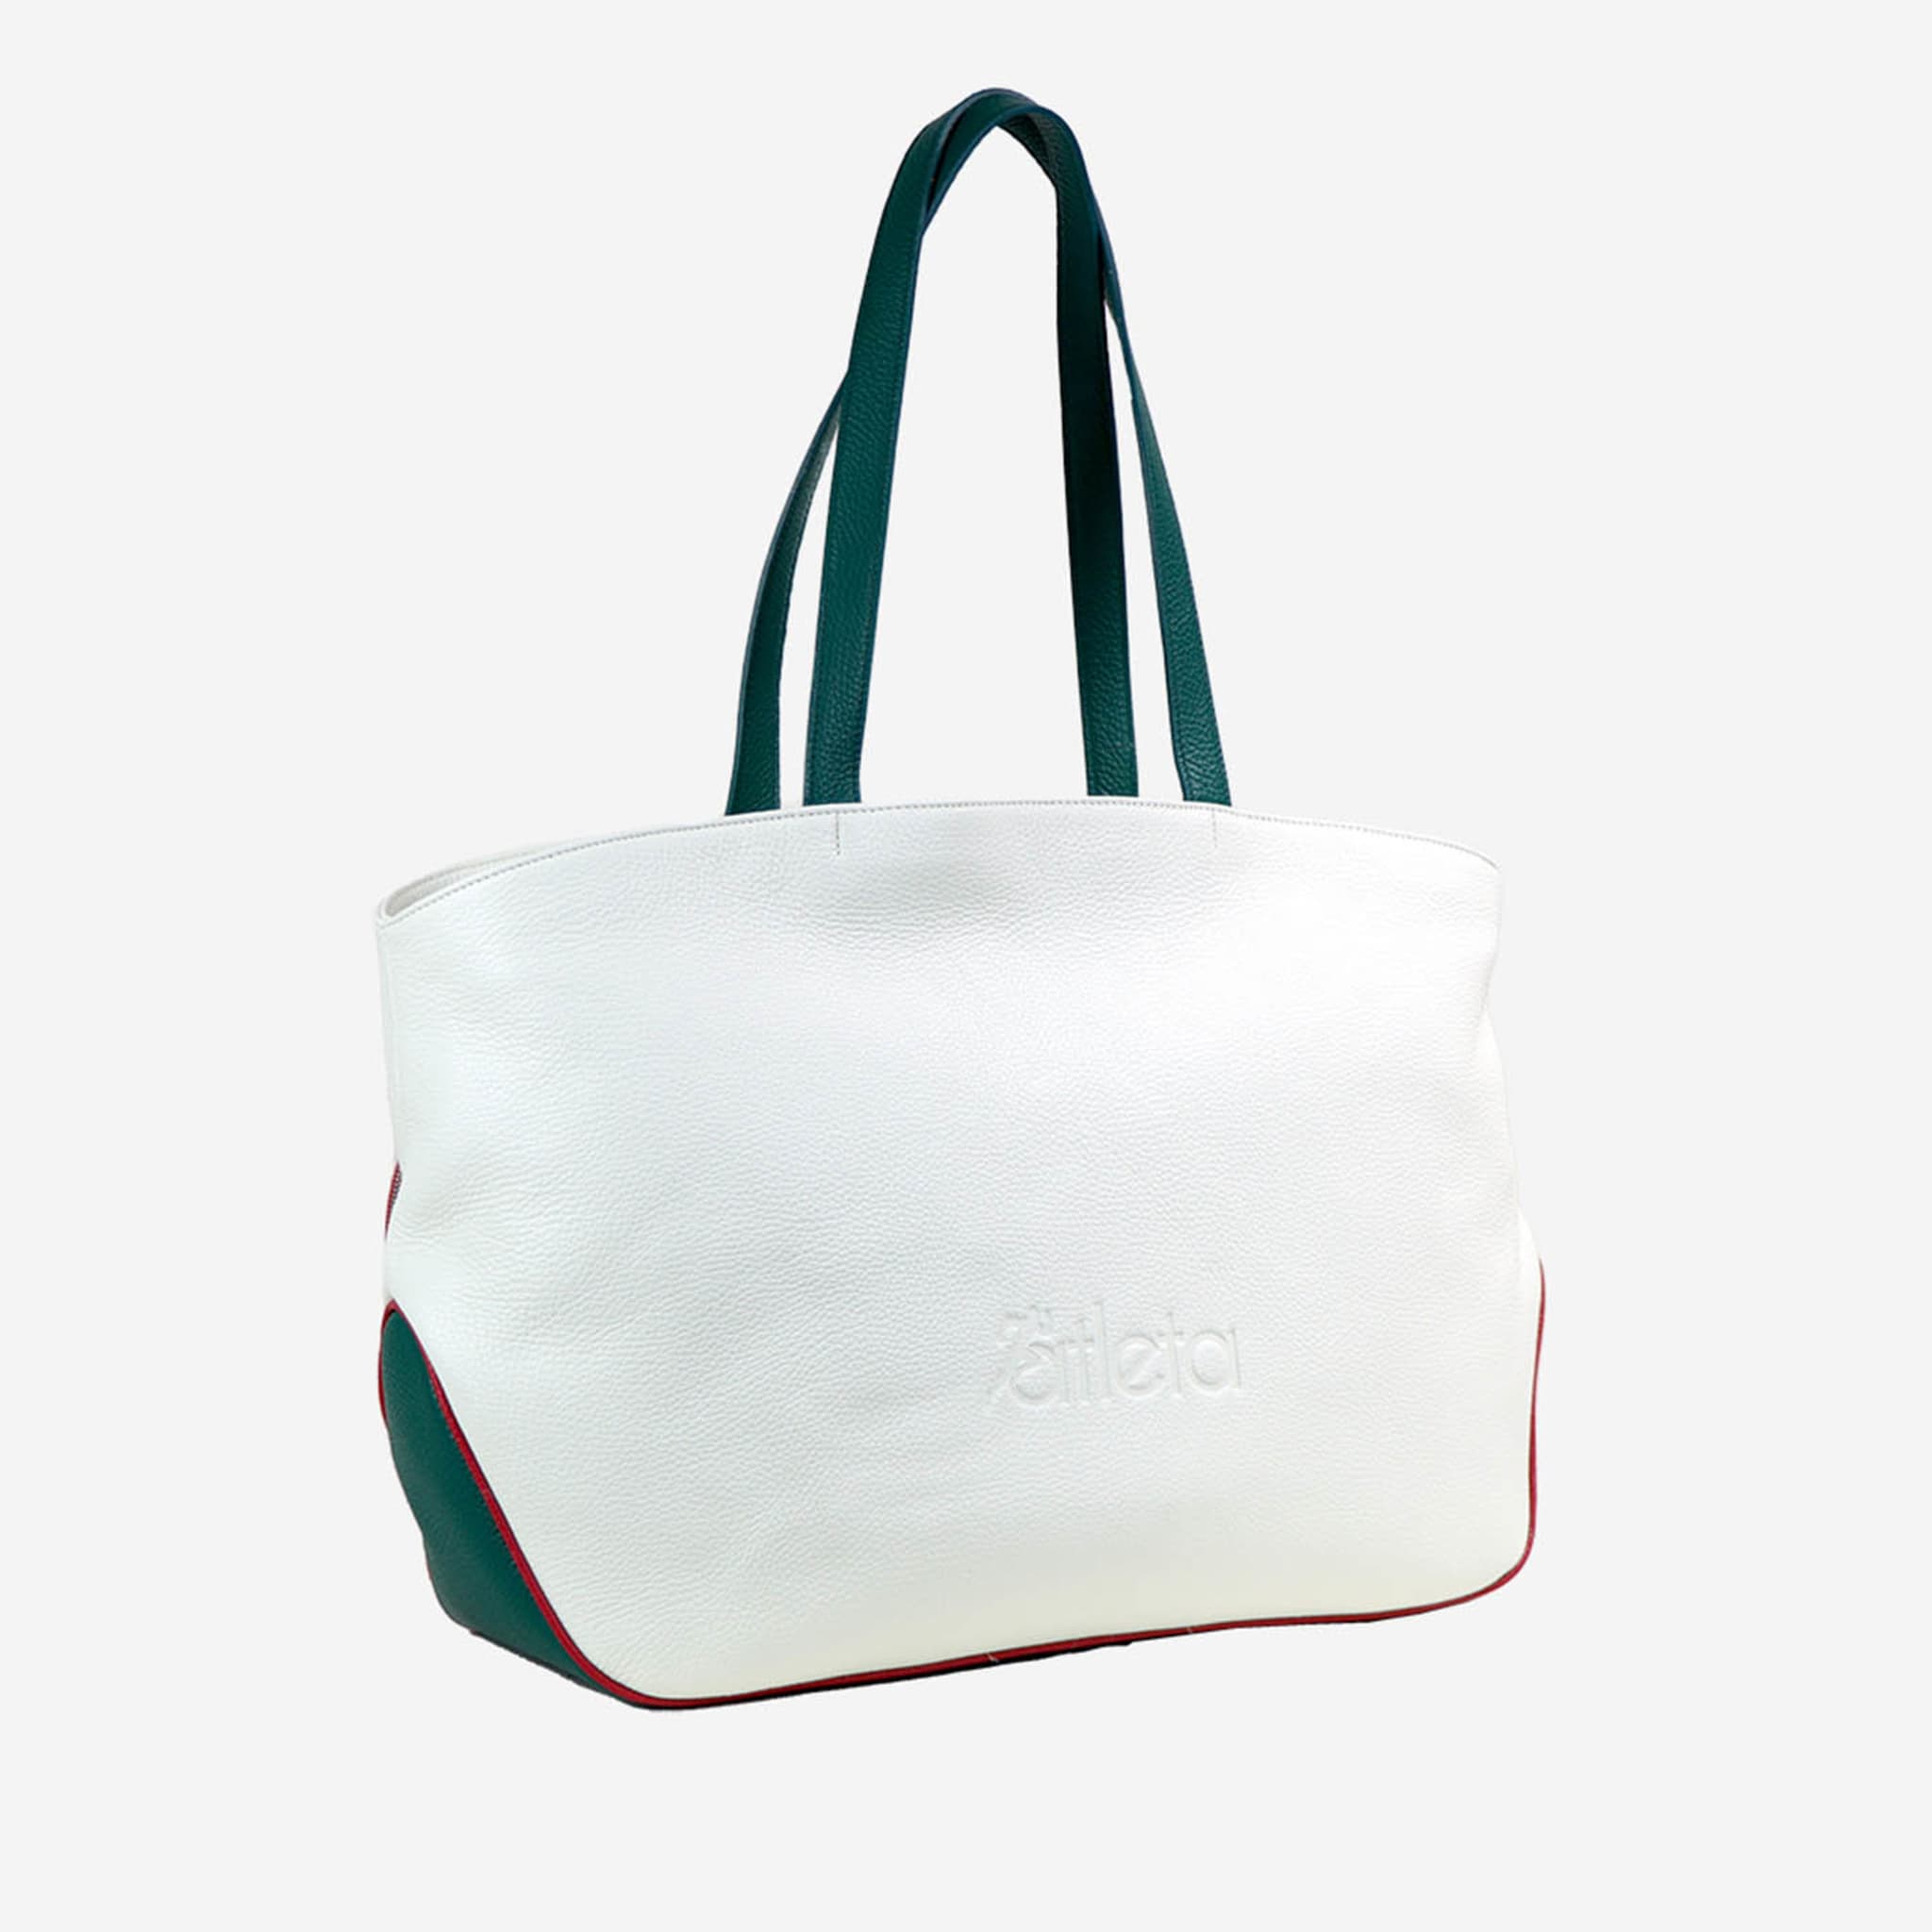 Sport White & Red Bag with Tennis-Racket-Shaped Pocket - Alternative view 4